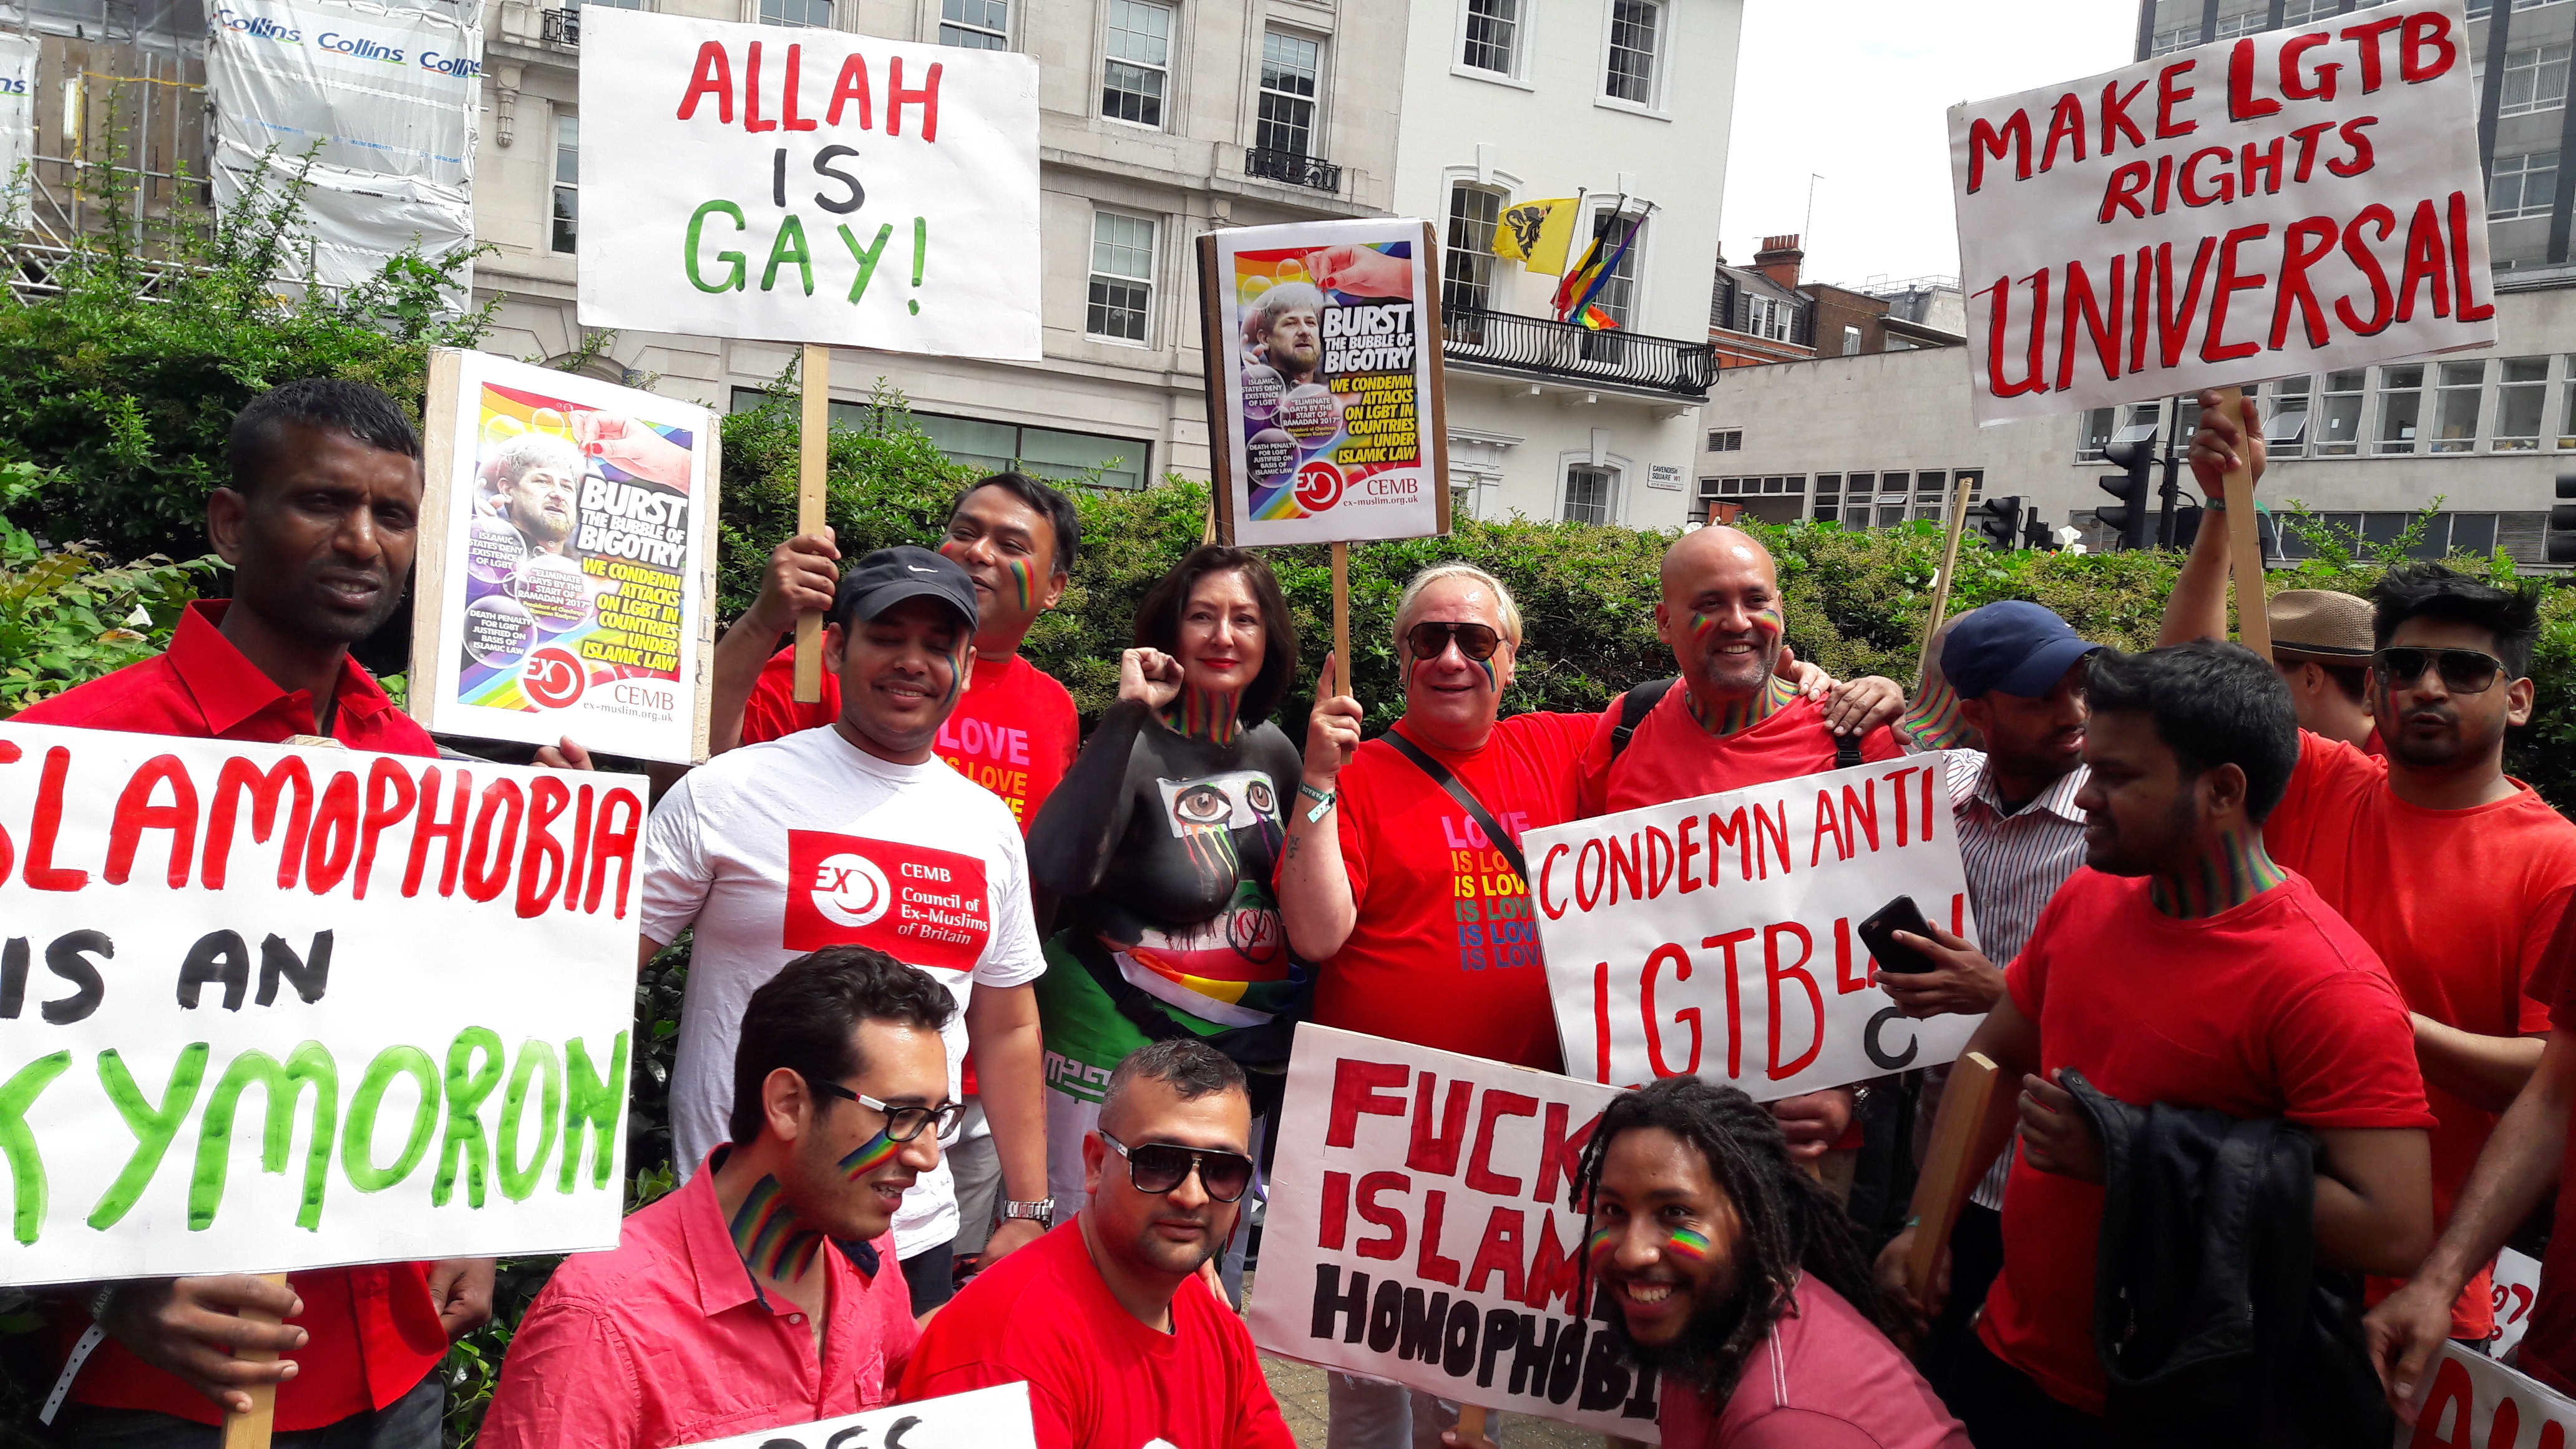 Photo of Allah is gay marchers London Pride 2019